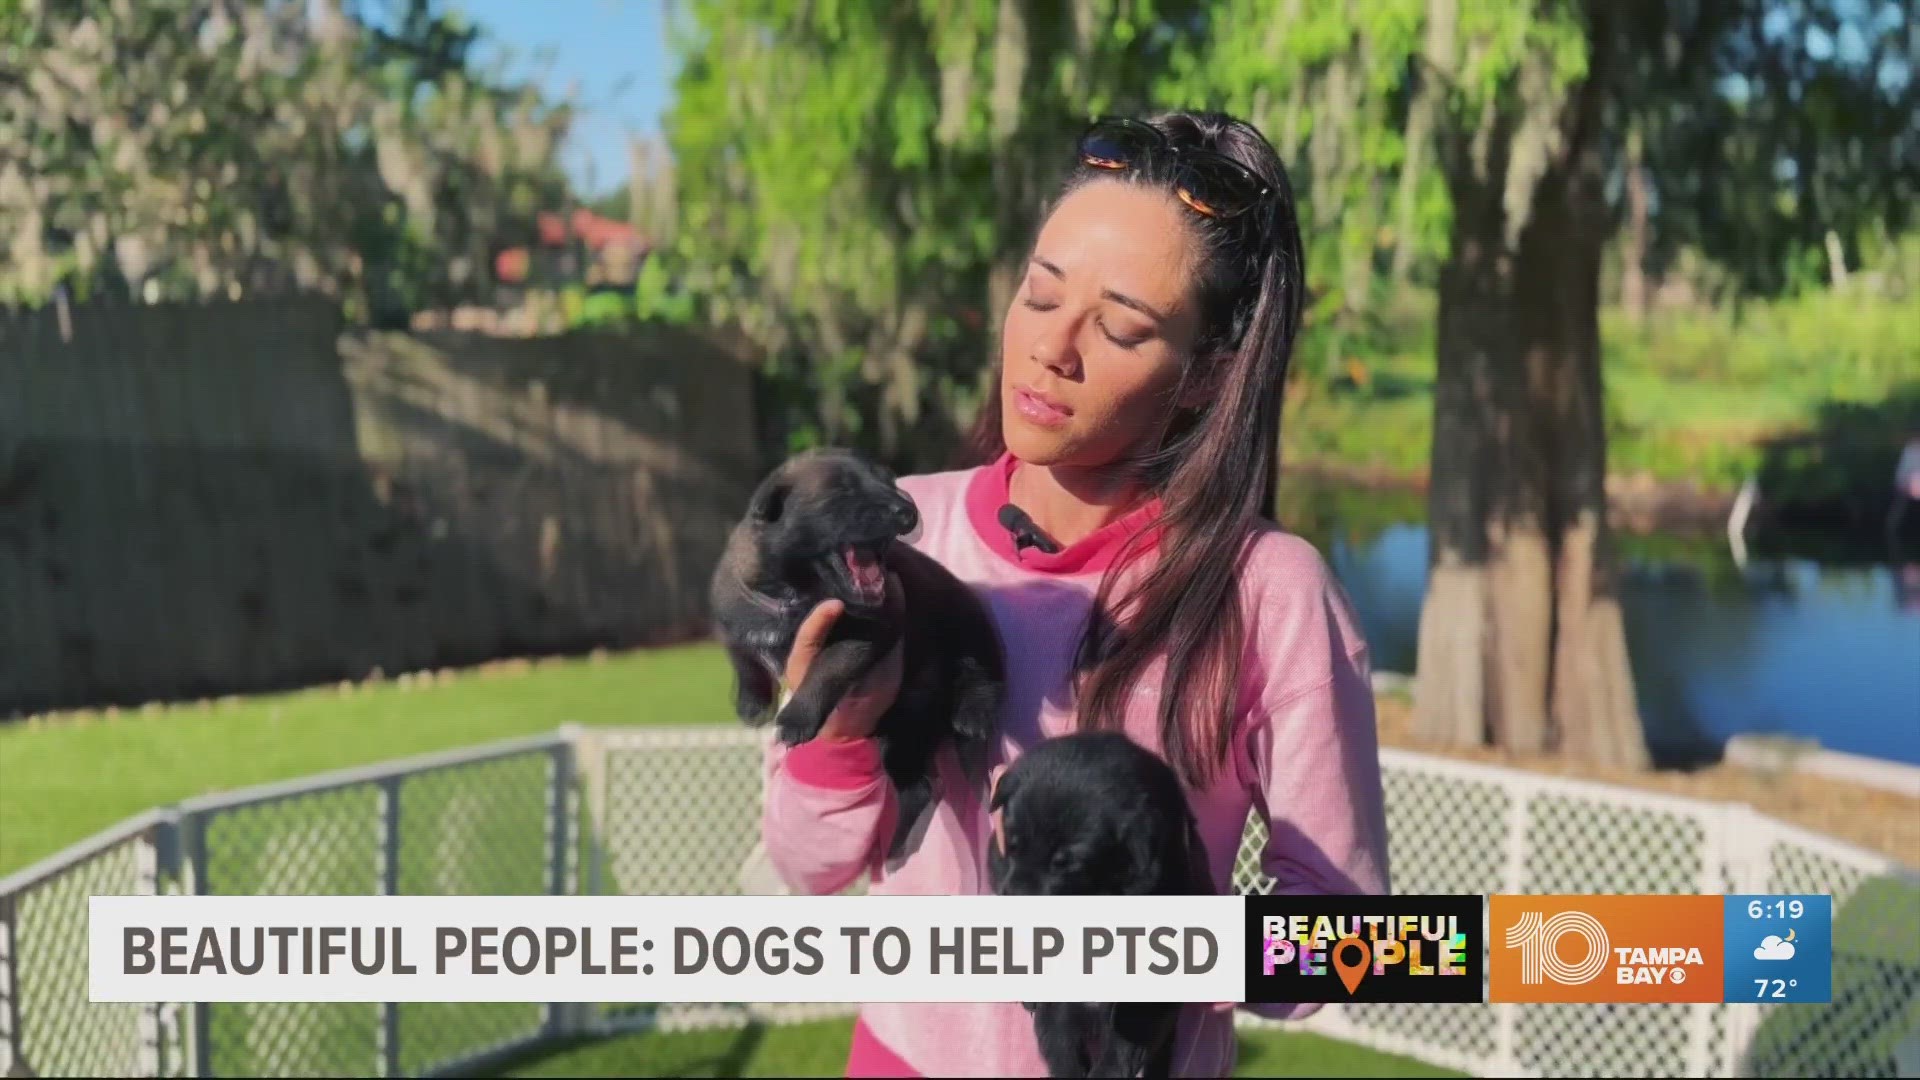 Brianna Holzerland trains protection dogs but has been giving away puppies to veterans suffering from PTSD. There's still time to nominate a veteran.